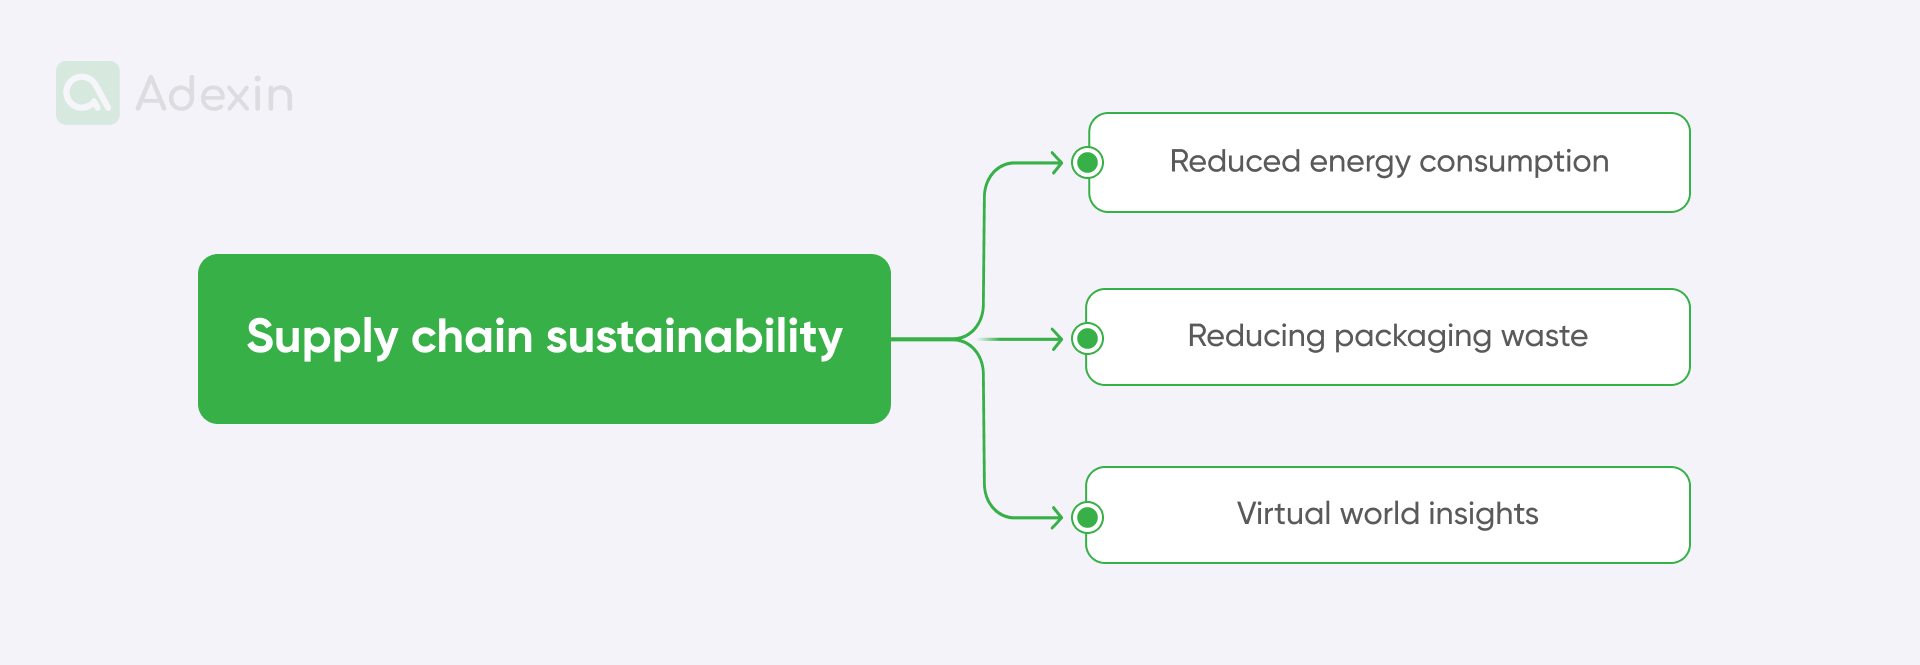 Digital twin in supply chain sustainability